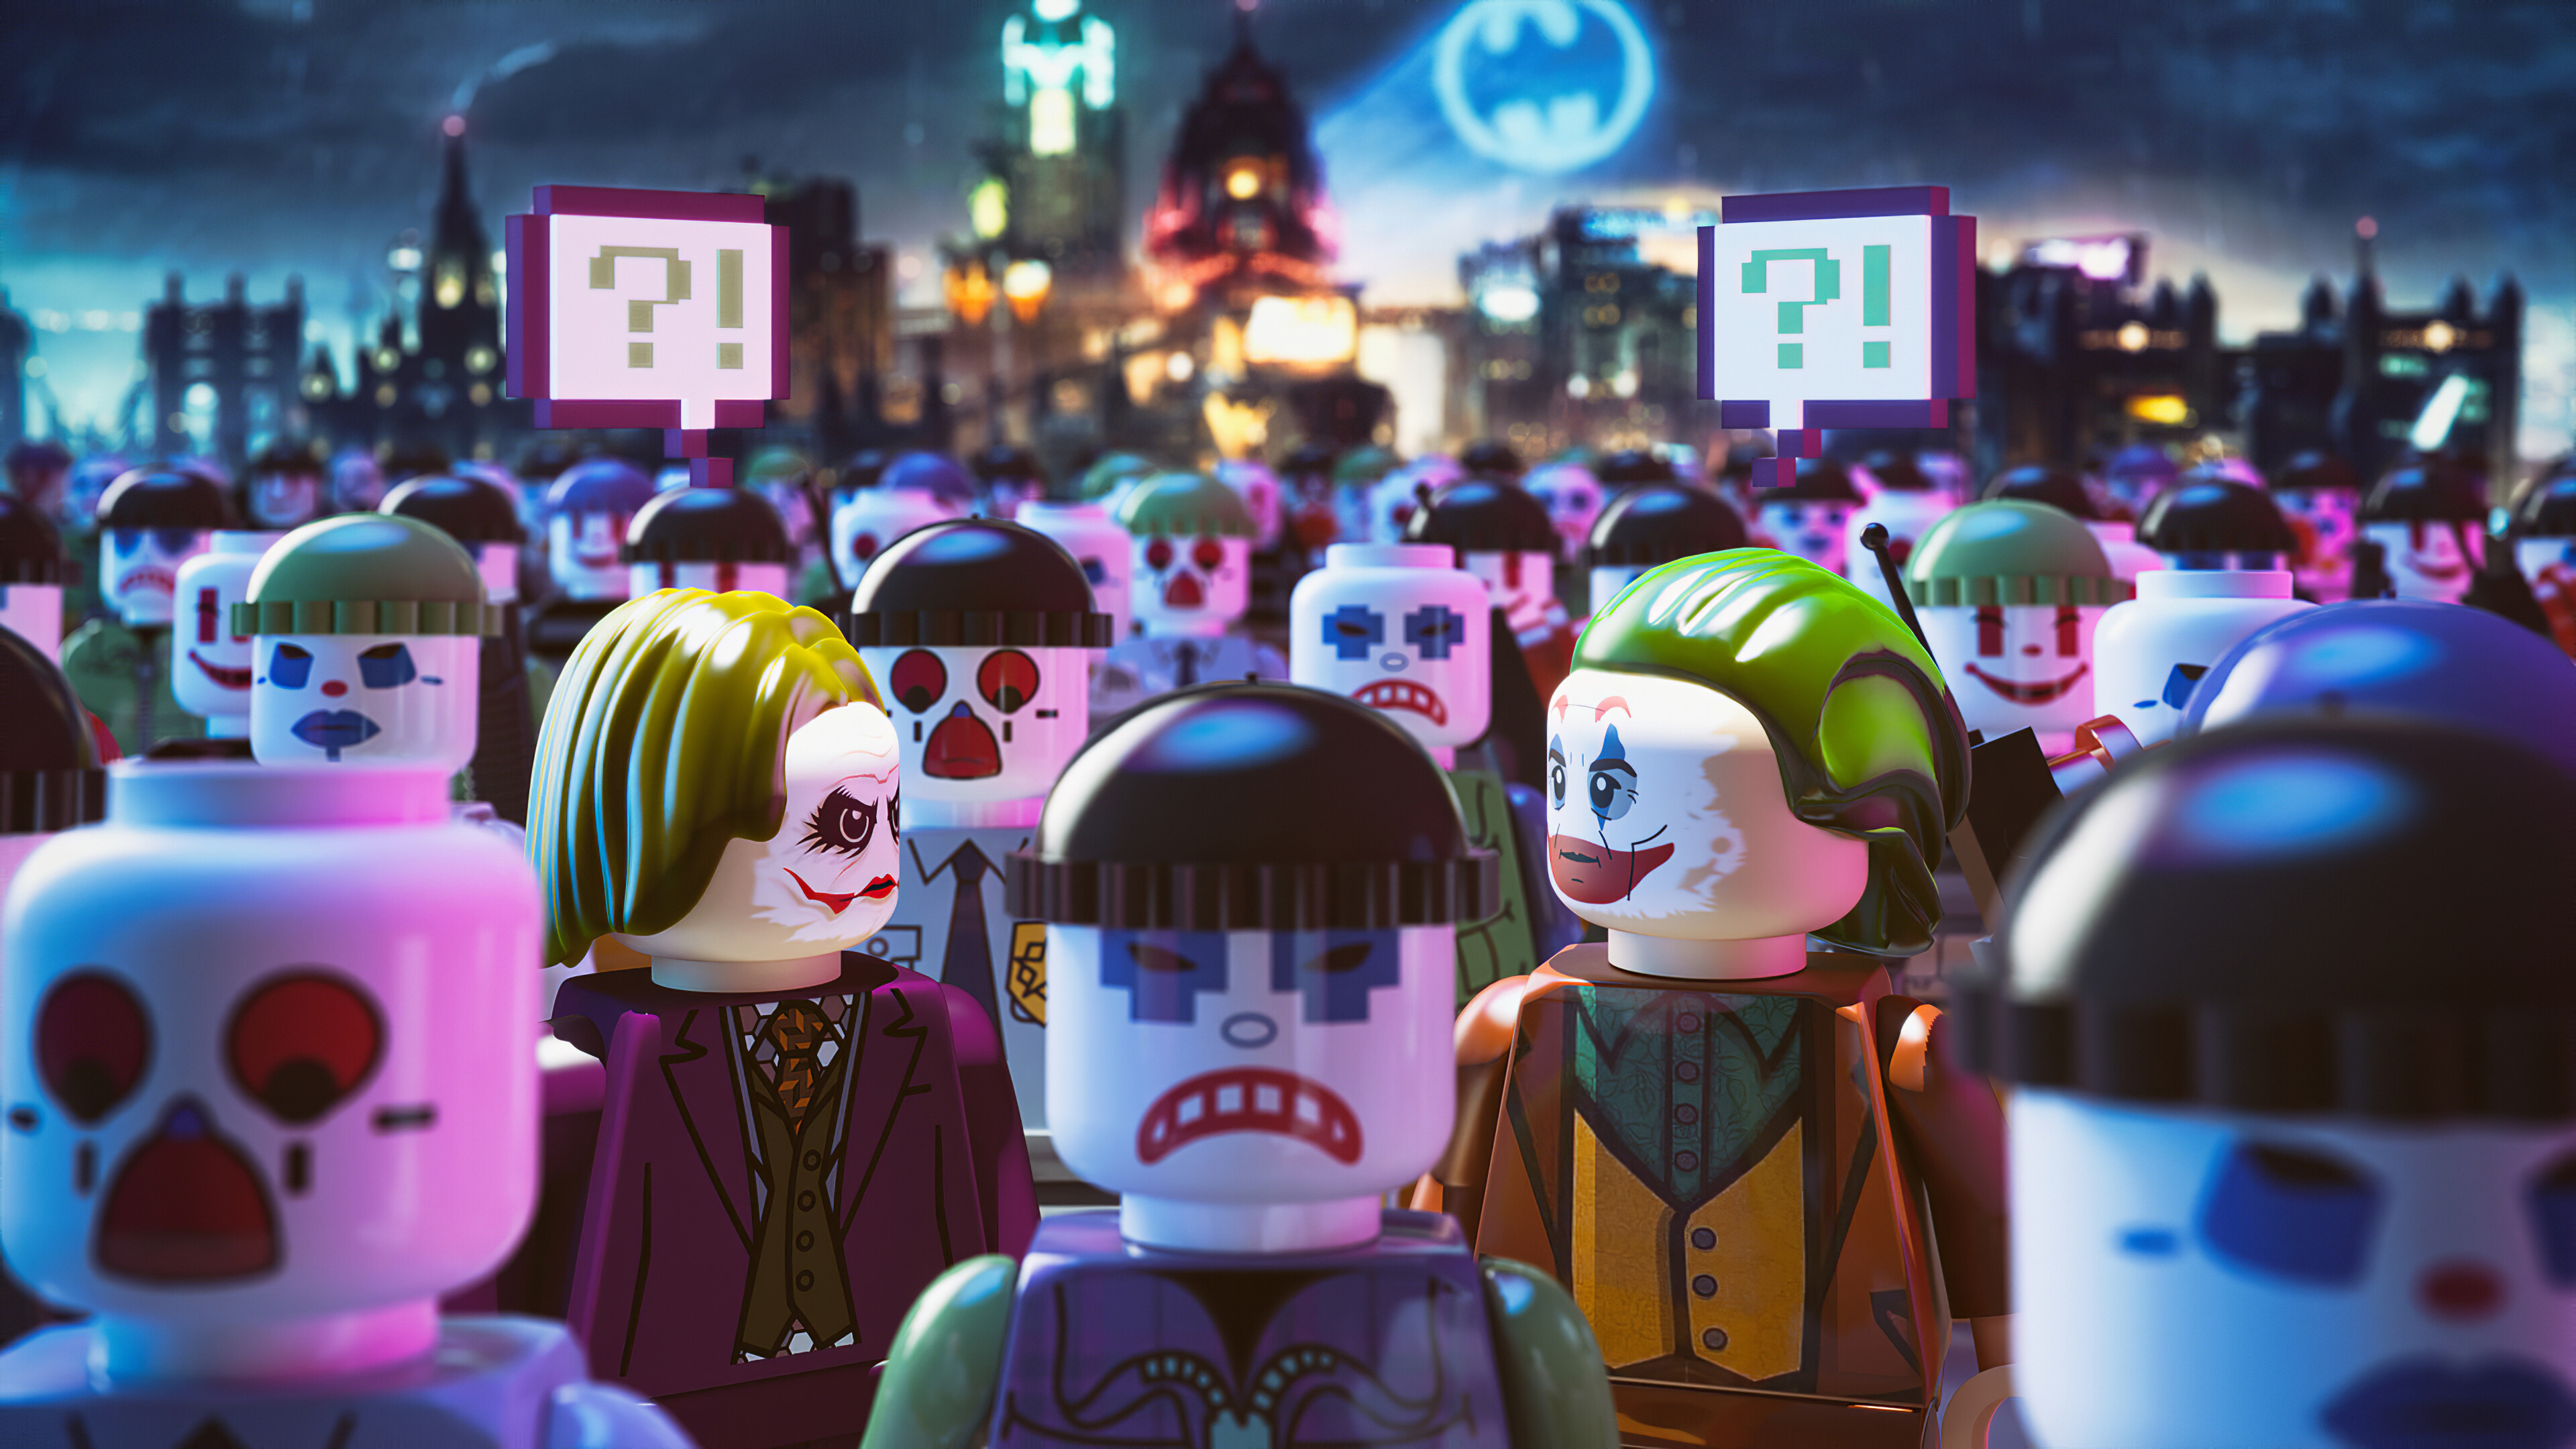 Lego: The Joker, Original bricks were based on the traditional wooden blocks used in carpentry. 3840x2160 4K Background.